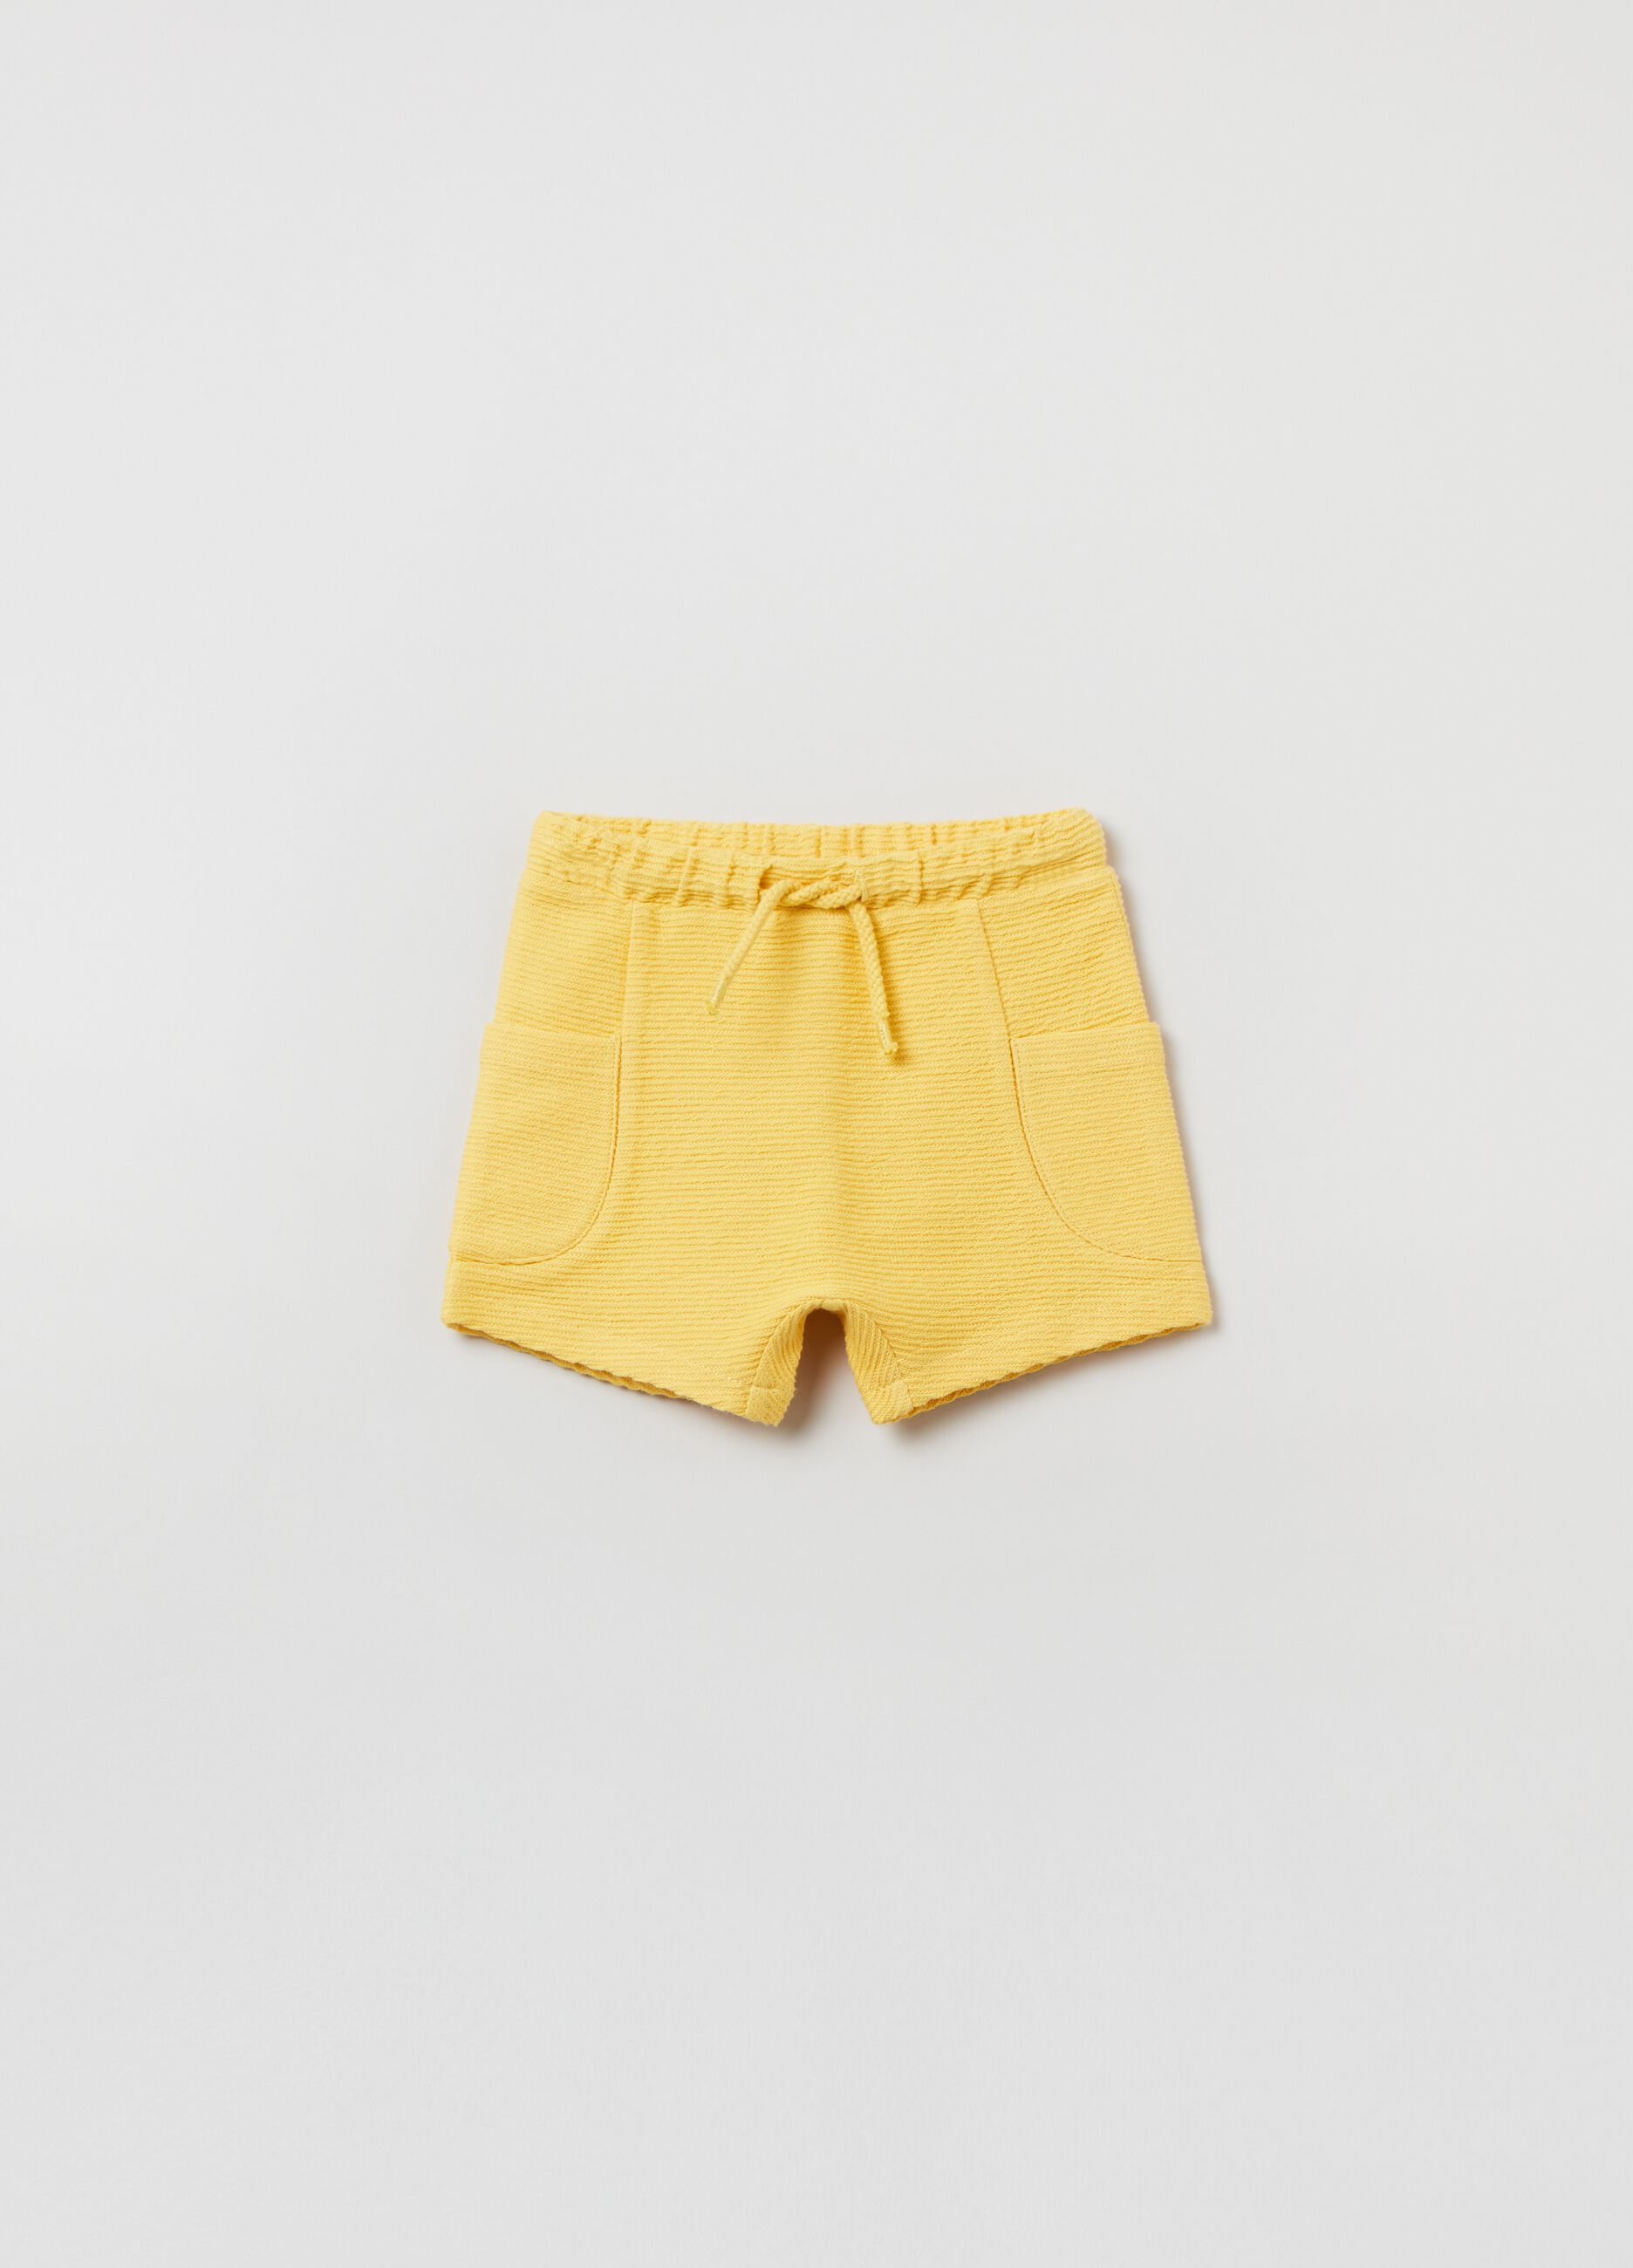 Shorts a trama rigata con coulisse